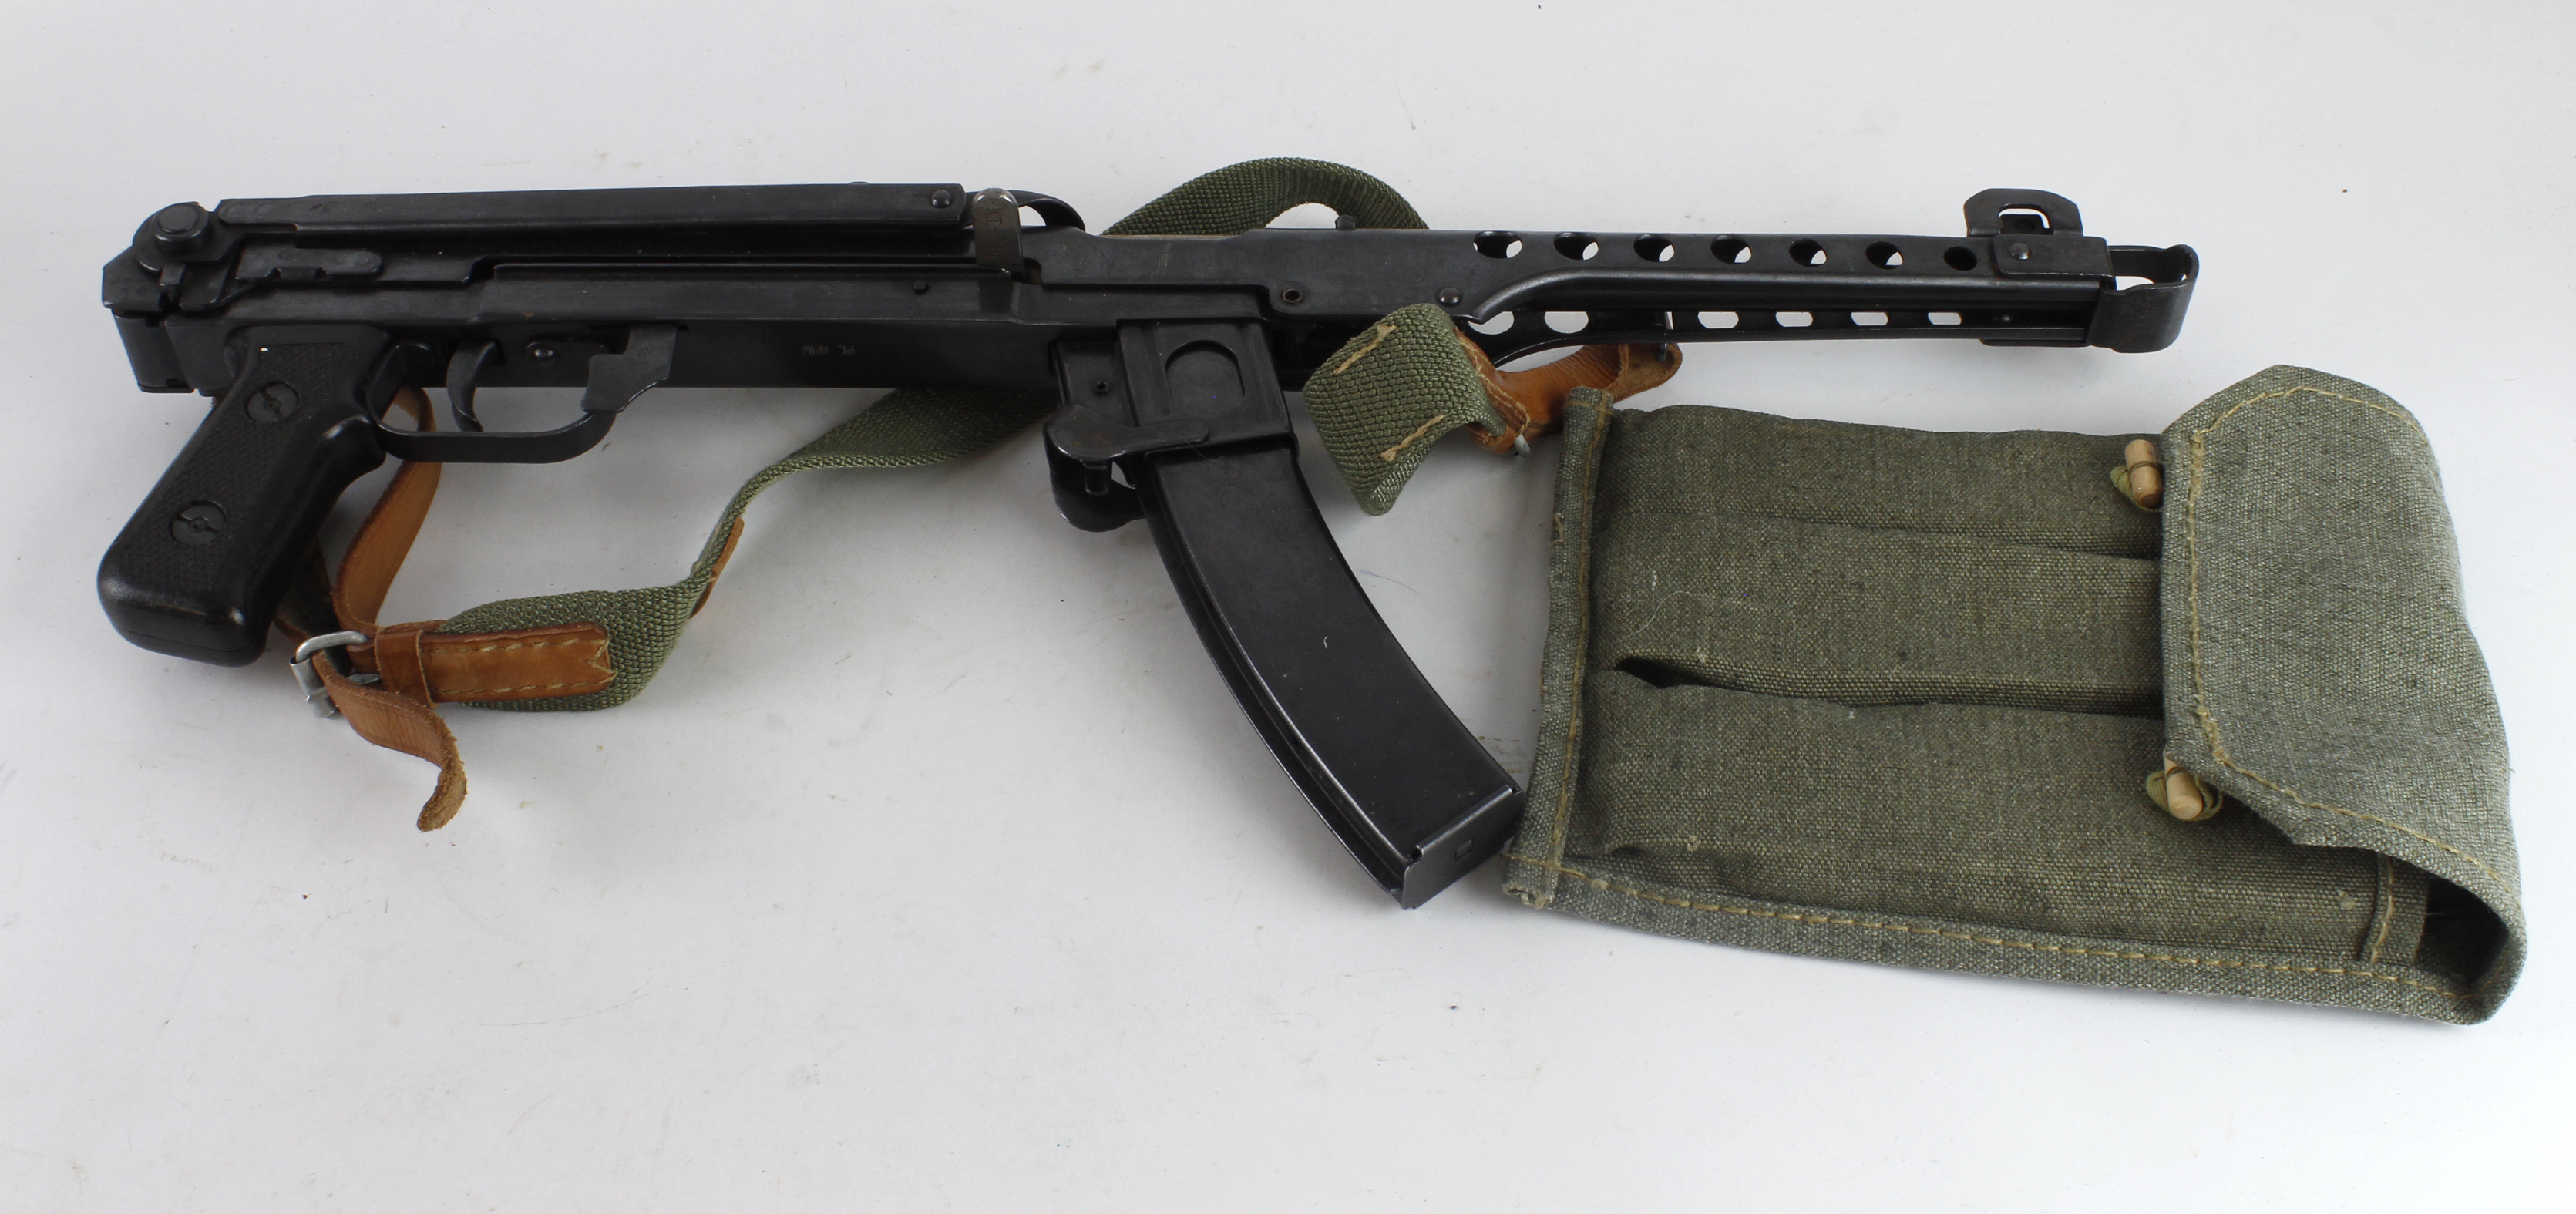 Polish PPS 43 7.62 mm sub machine gun with current EU certificate comes with 3 spare mags in case.